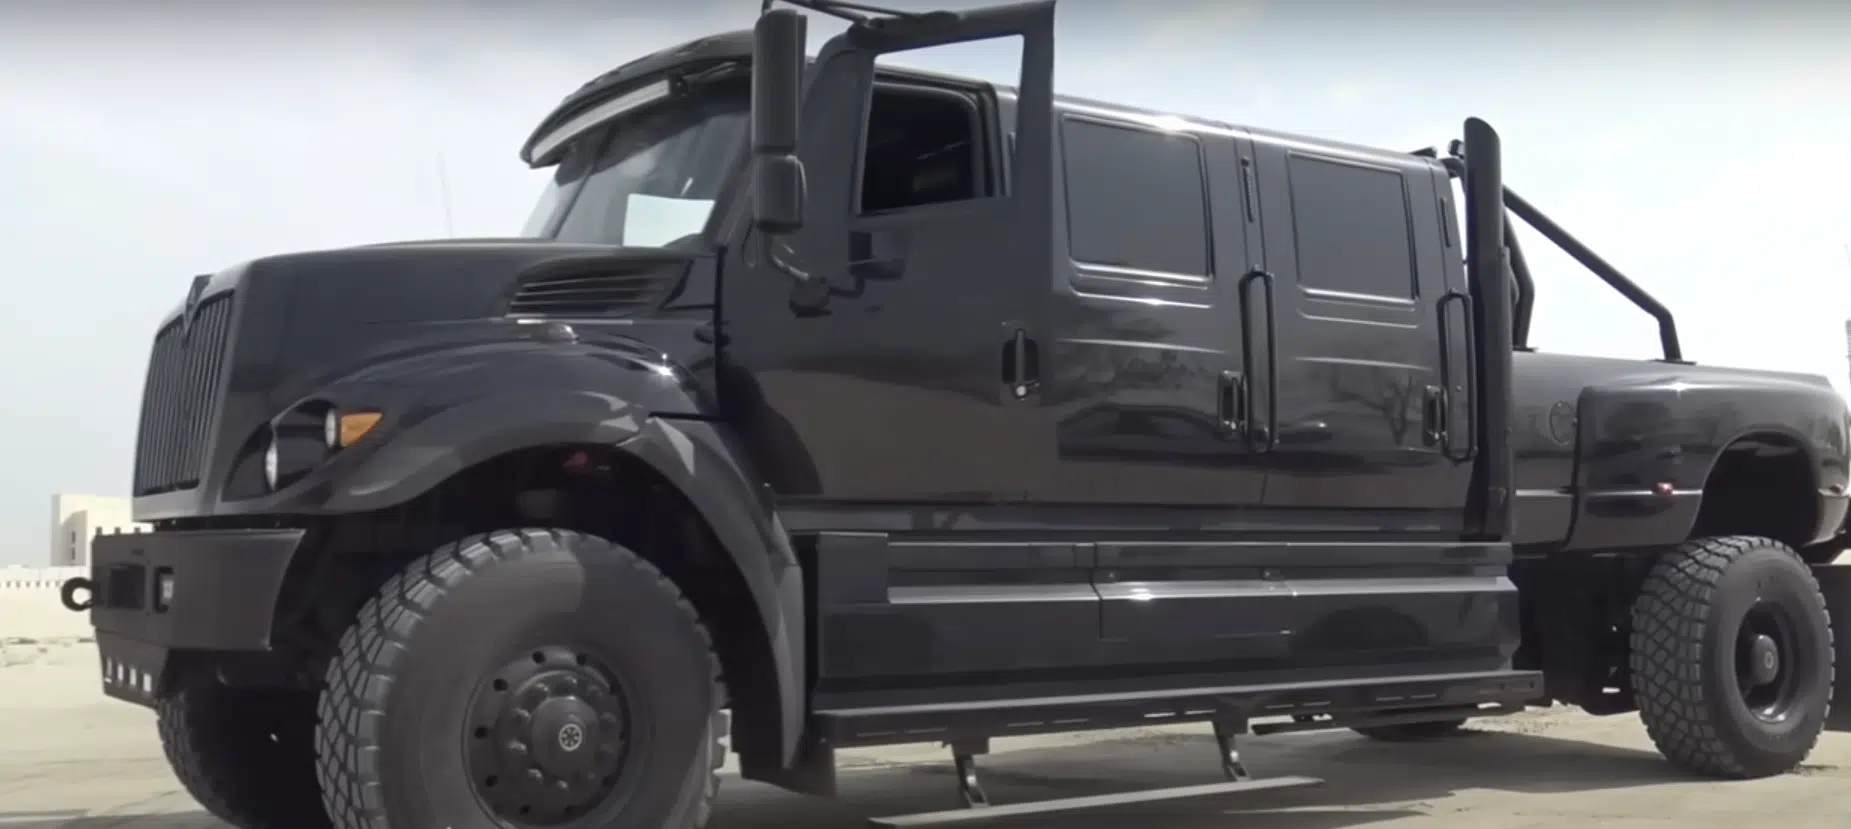 watch-this-500000-monster-pickup-truck-is-a-real-beast